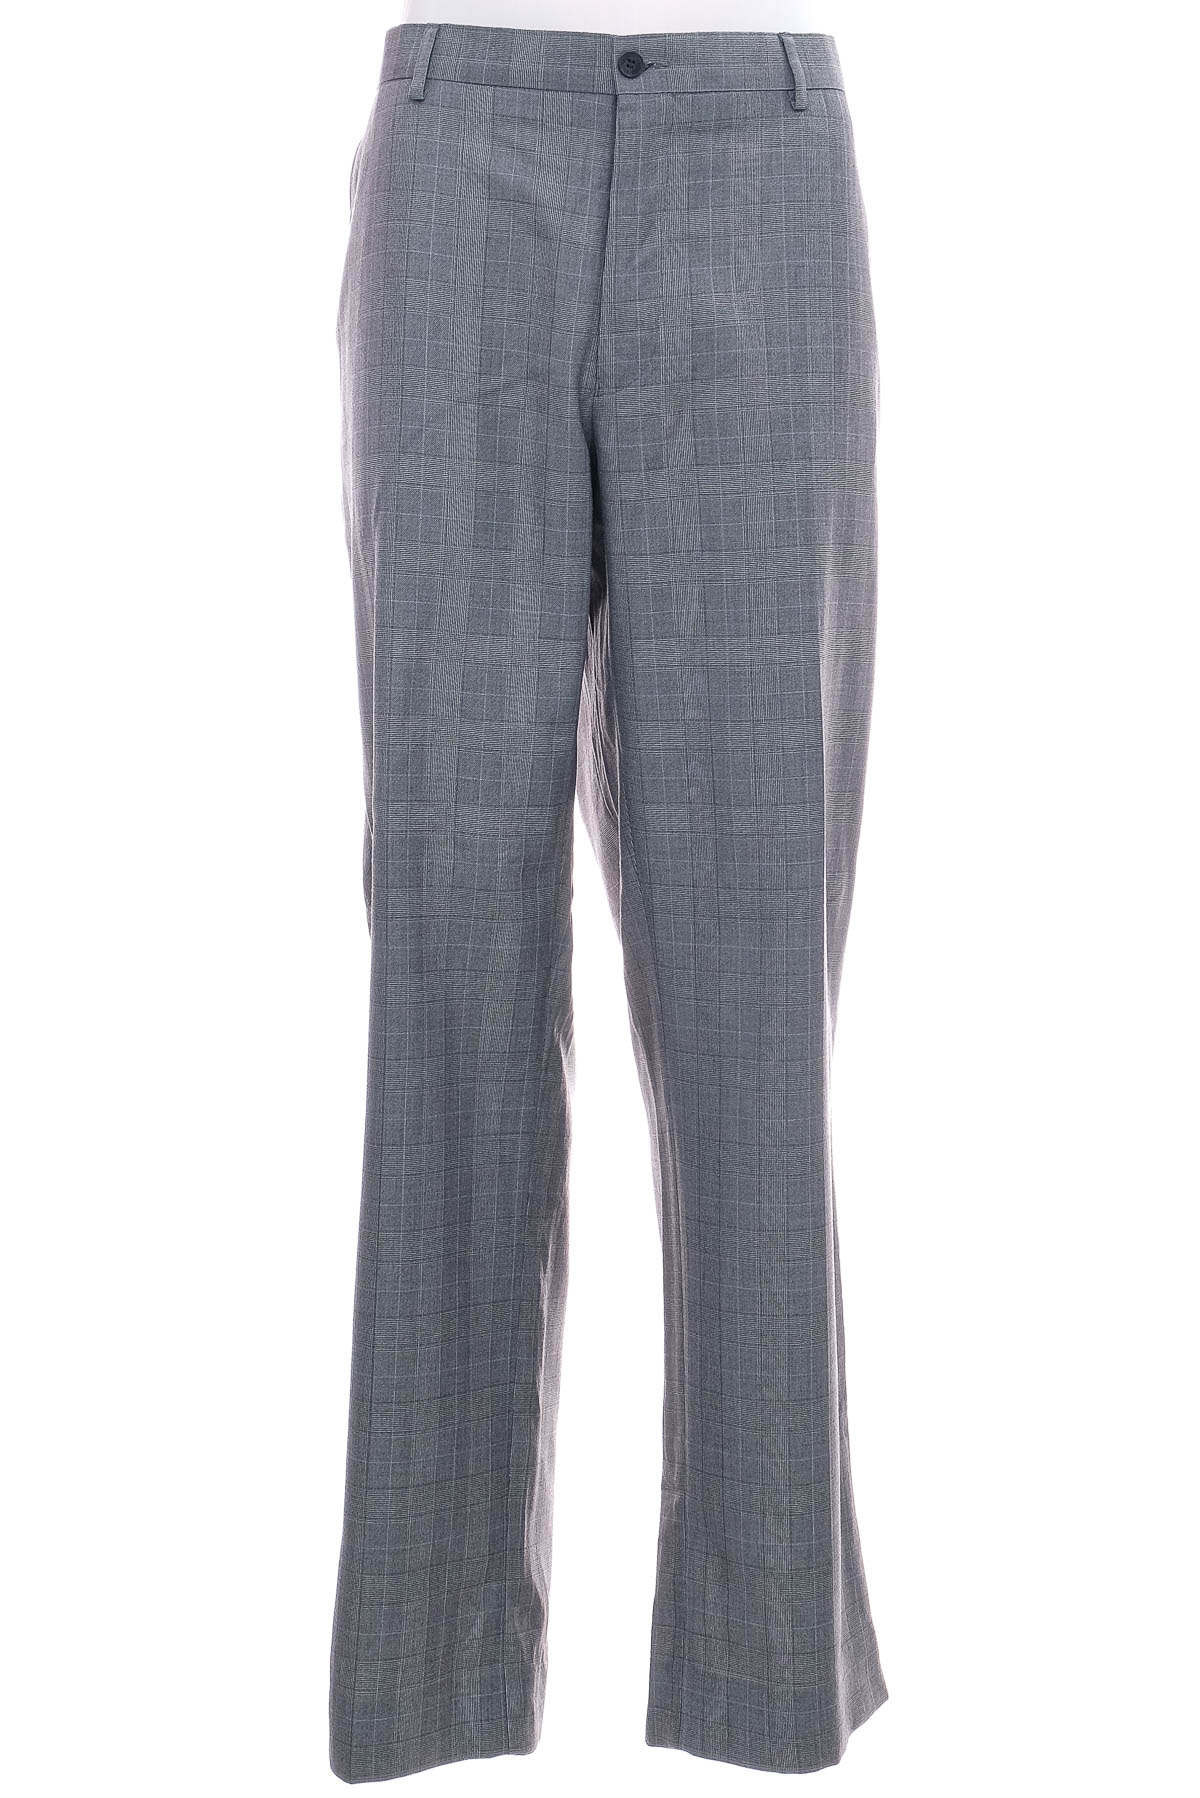 Men's trousers - Taylor & Wright by Matalan - 0